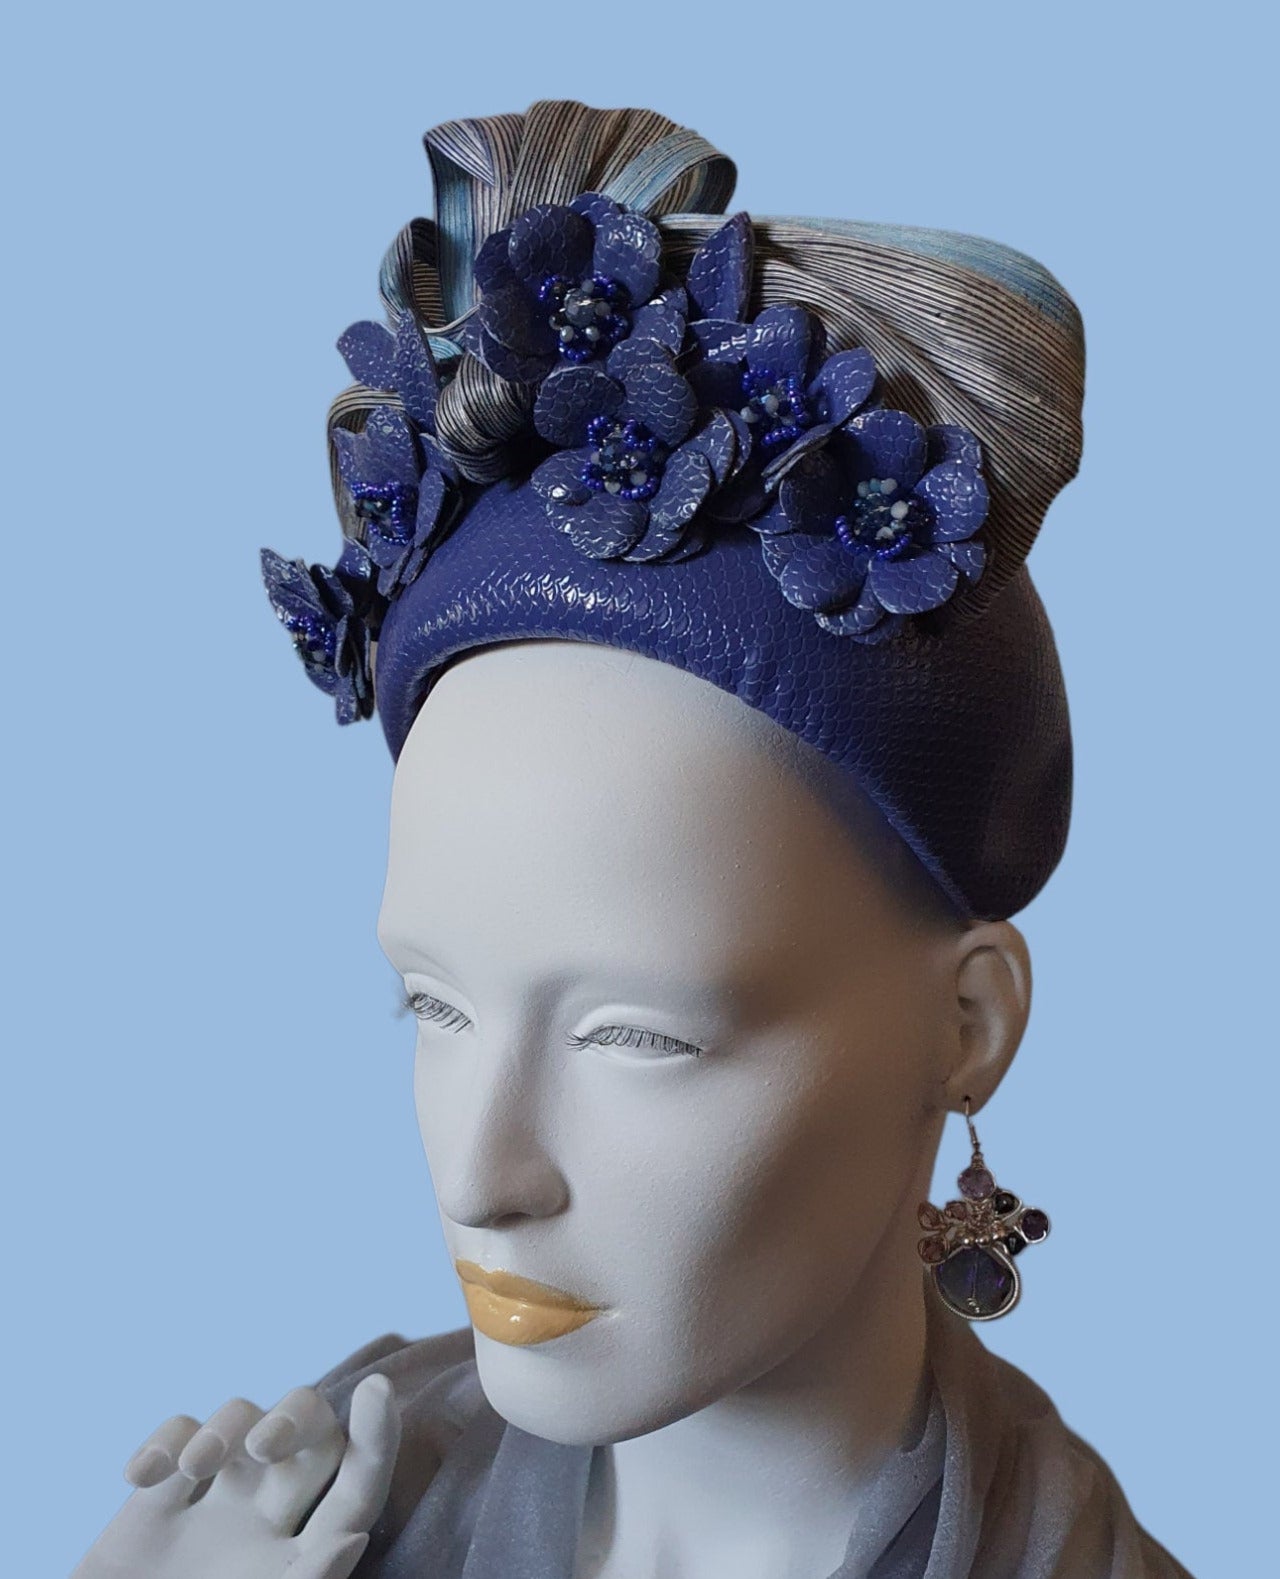 Handmade purple and blue headband from natural leather with flowers and silk abaca - beautiful headband, festive unique diadem